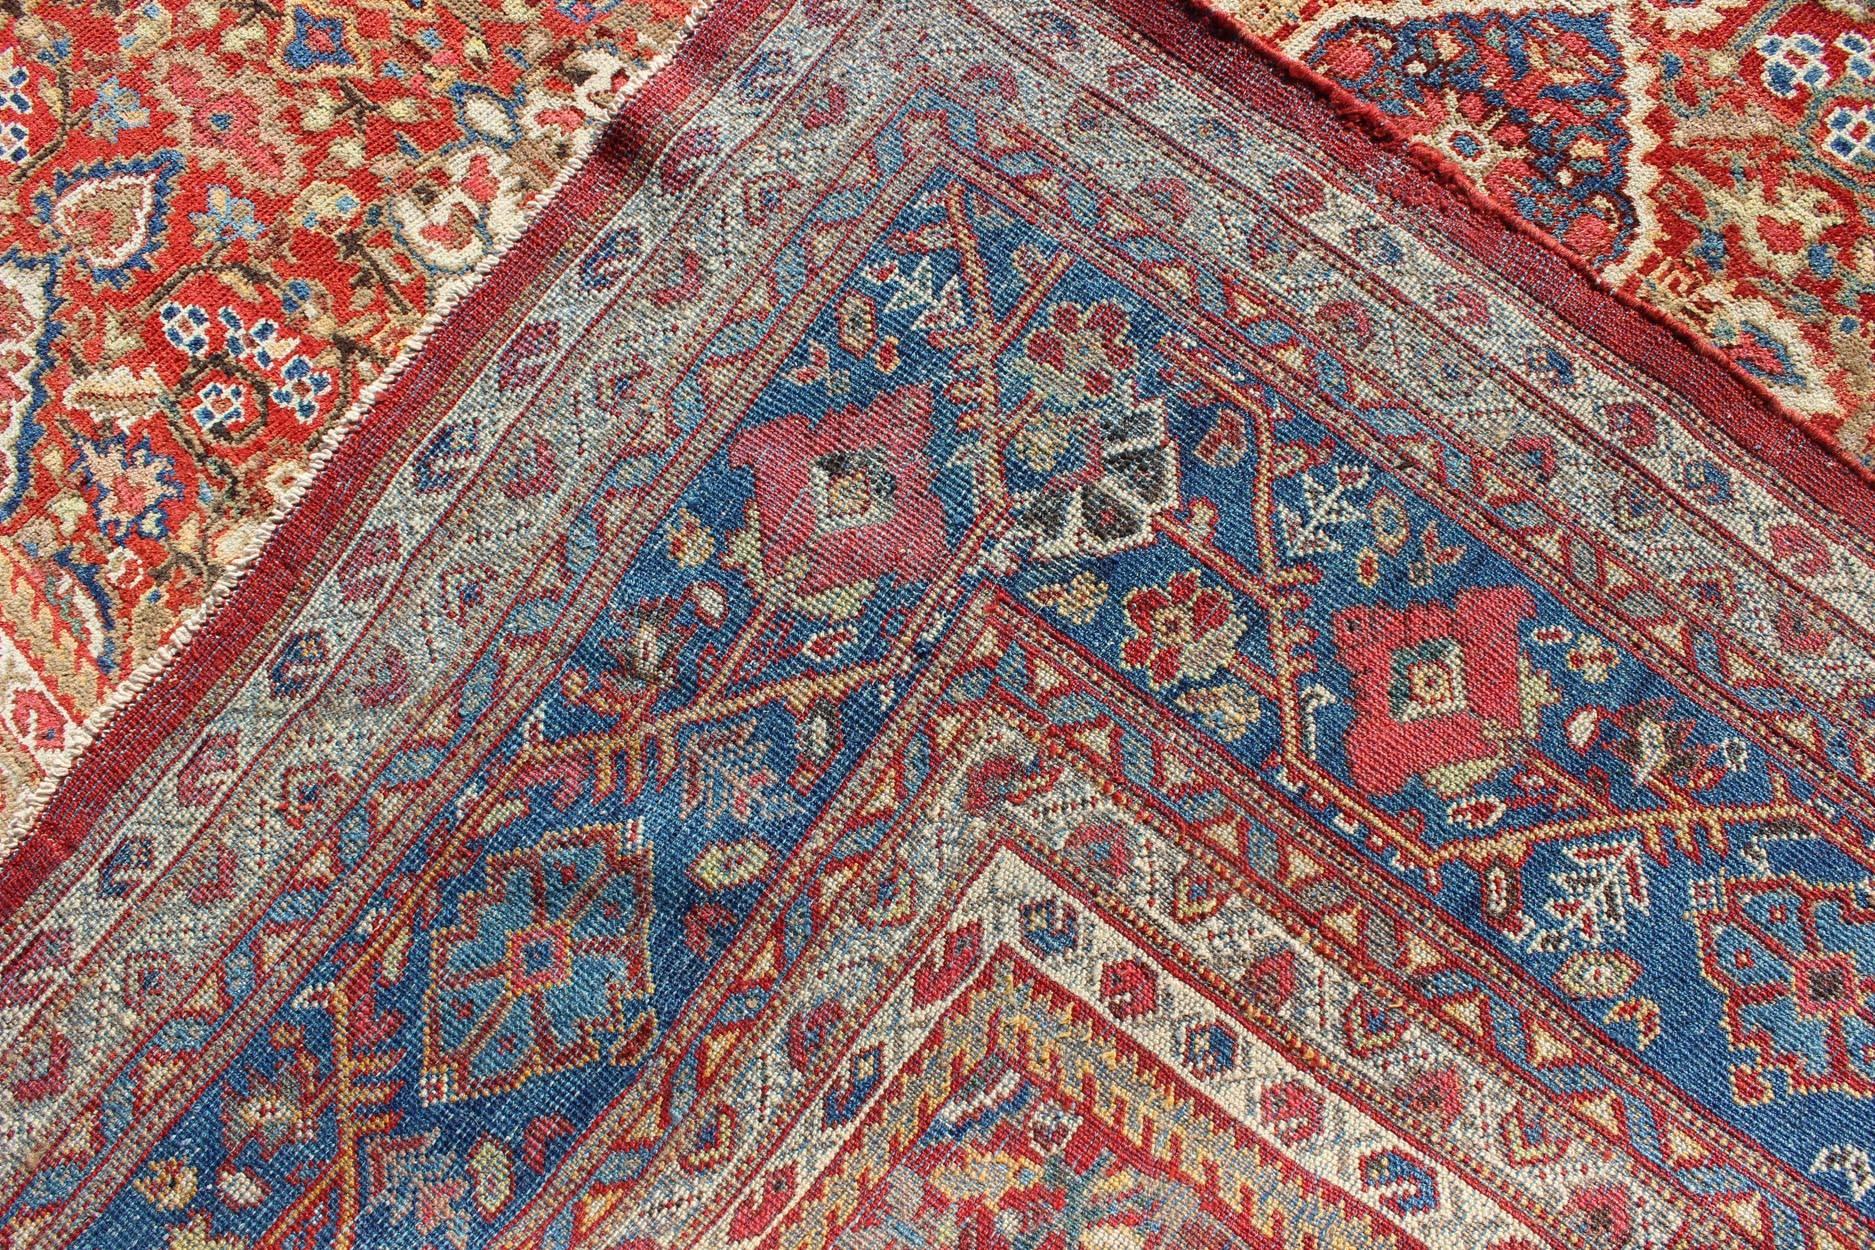 Late 19th Century Antique Sultanabad Persian Rug in Tomato Red and Light Blue In Good Condition For Sale In Atlanta, GA